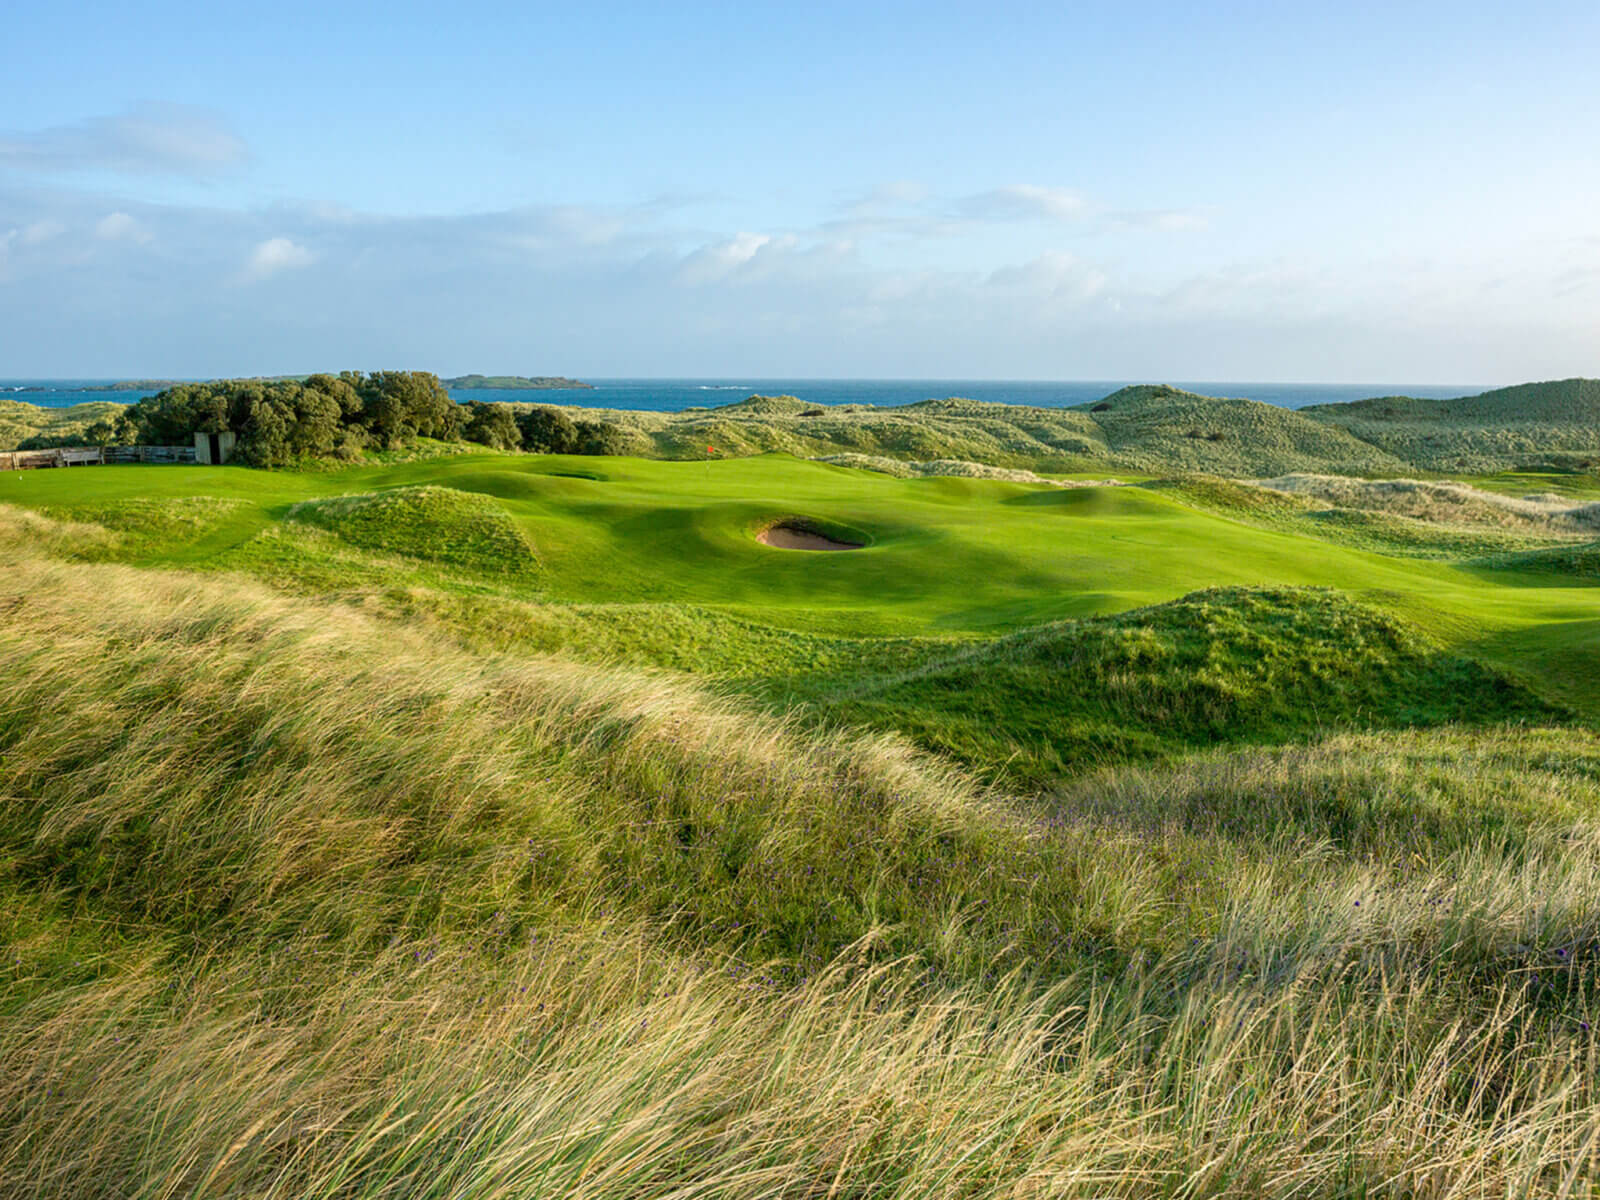 Image depicting the 13th green and surrounding bunkers at Royal Portrush Dunluce Golf Course, Portrush, County Antrim, Northern Ireland